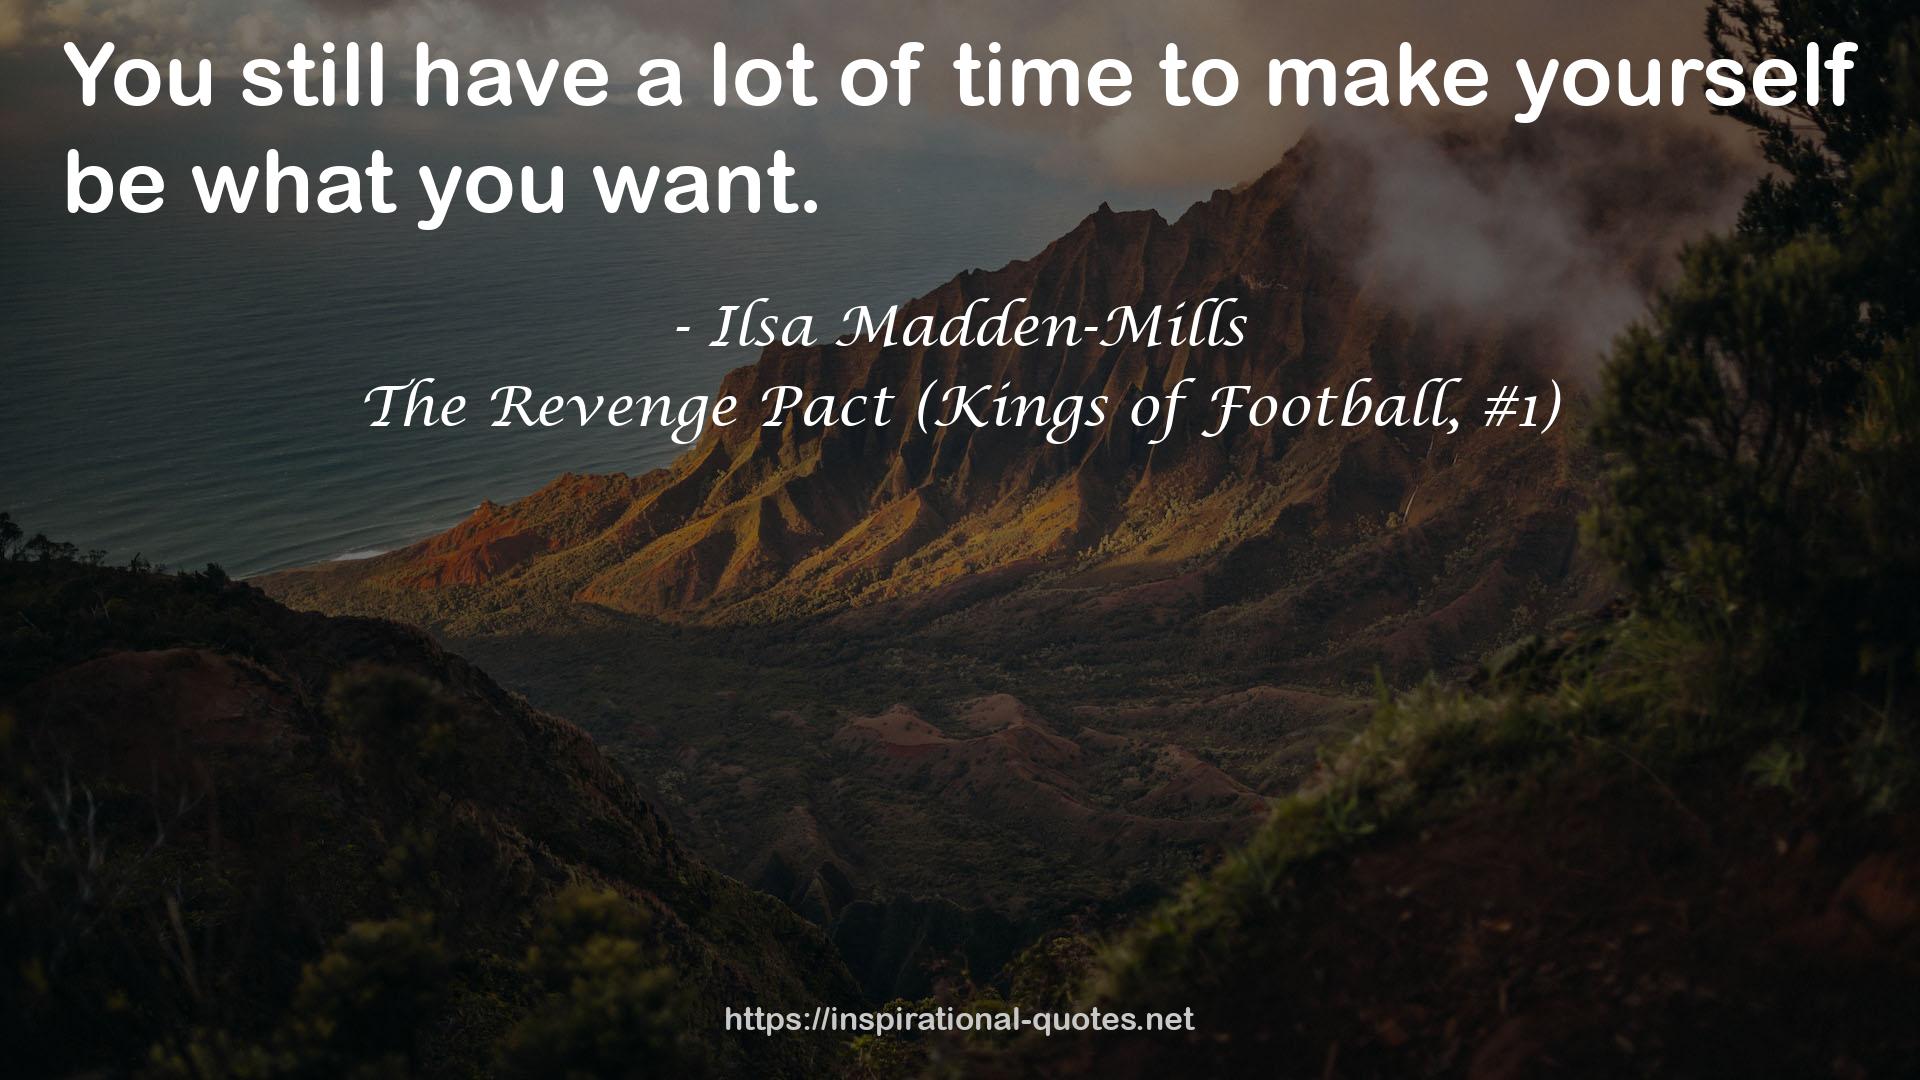 The Revenge Pact (Kings of Football, #1) QUOTES